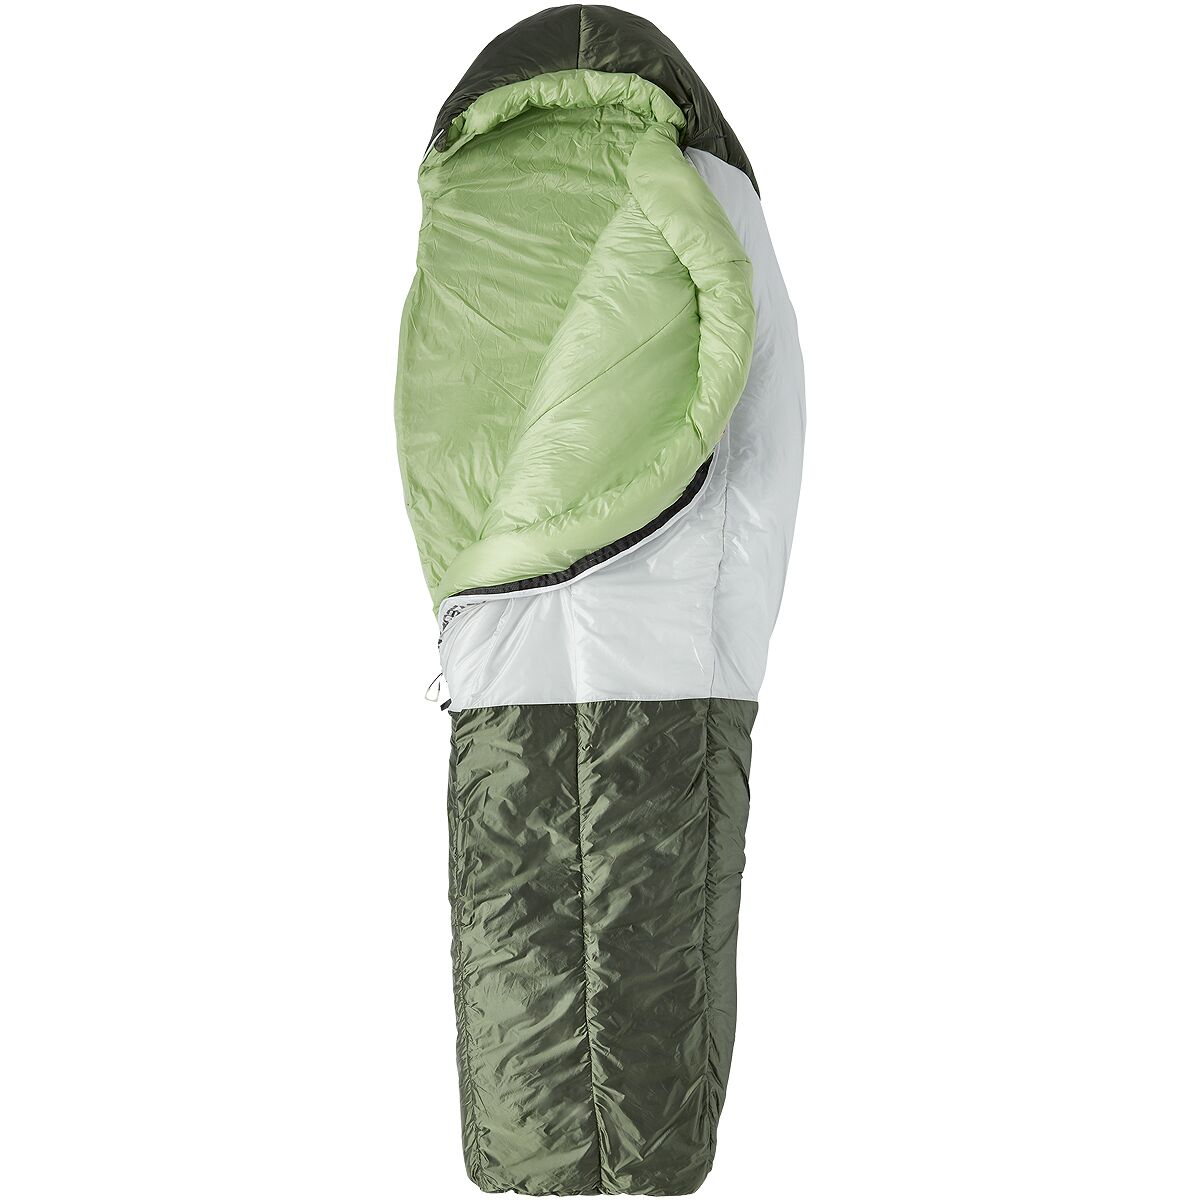 The North Face Snow Leopard Sleeping Bag: 5F Synthetic